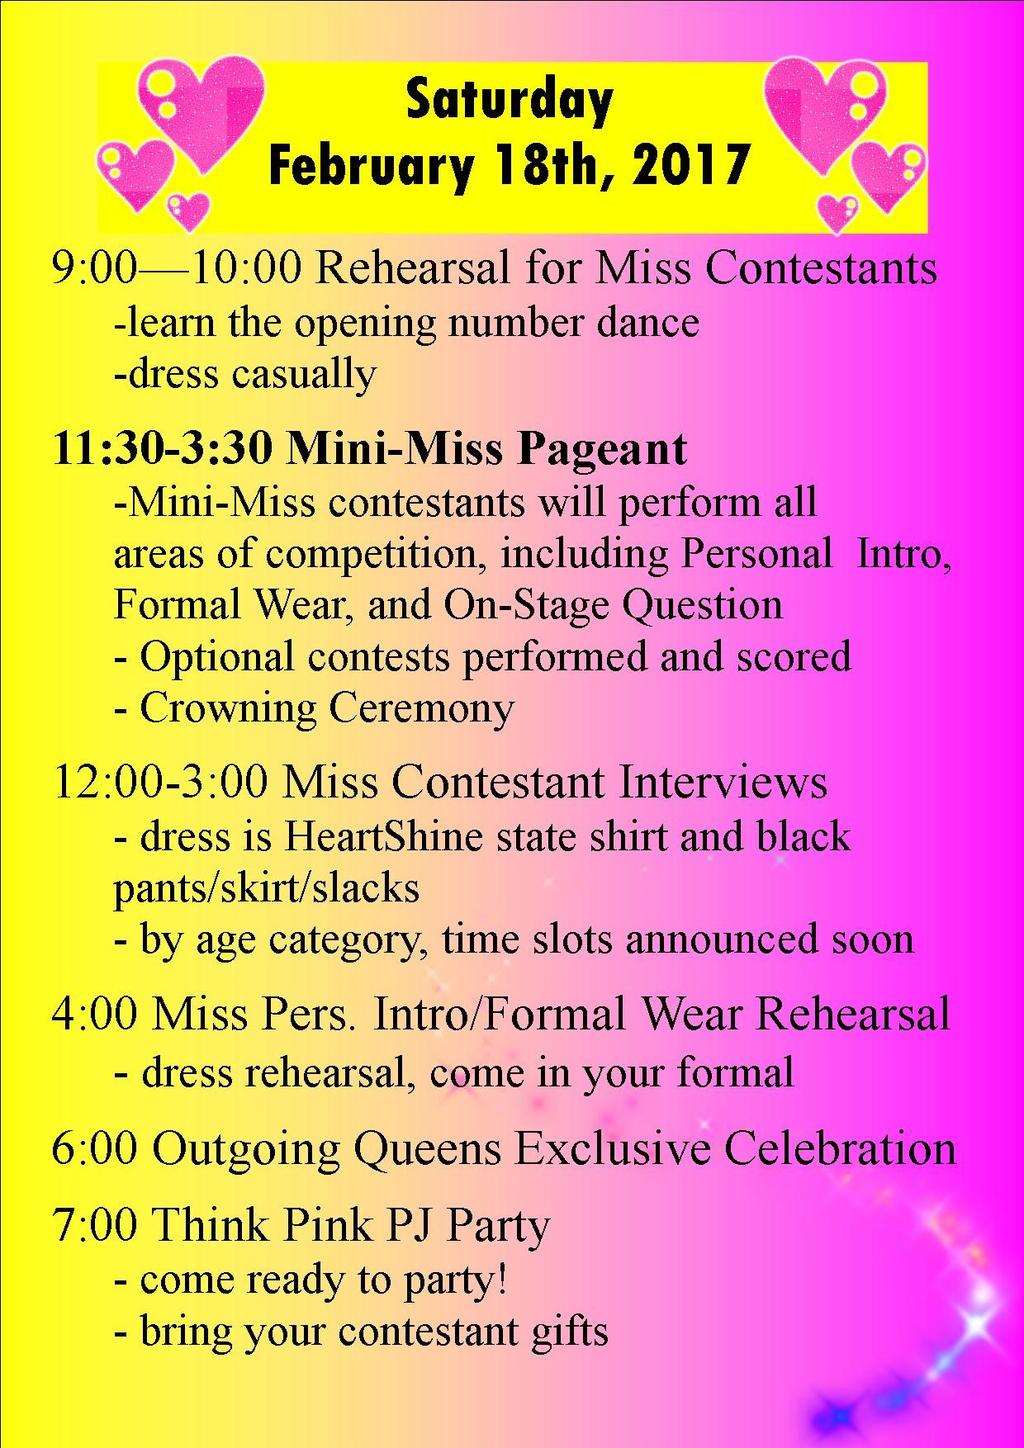 Mini-Miss is taking place on Friday and Saturday (with crowning ceremony and all competitions on